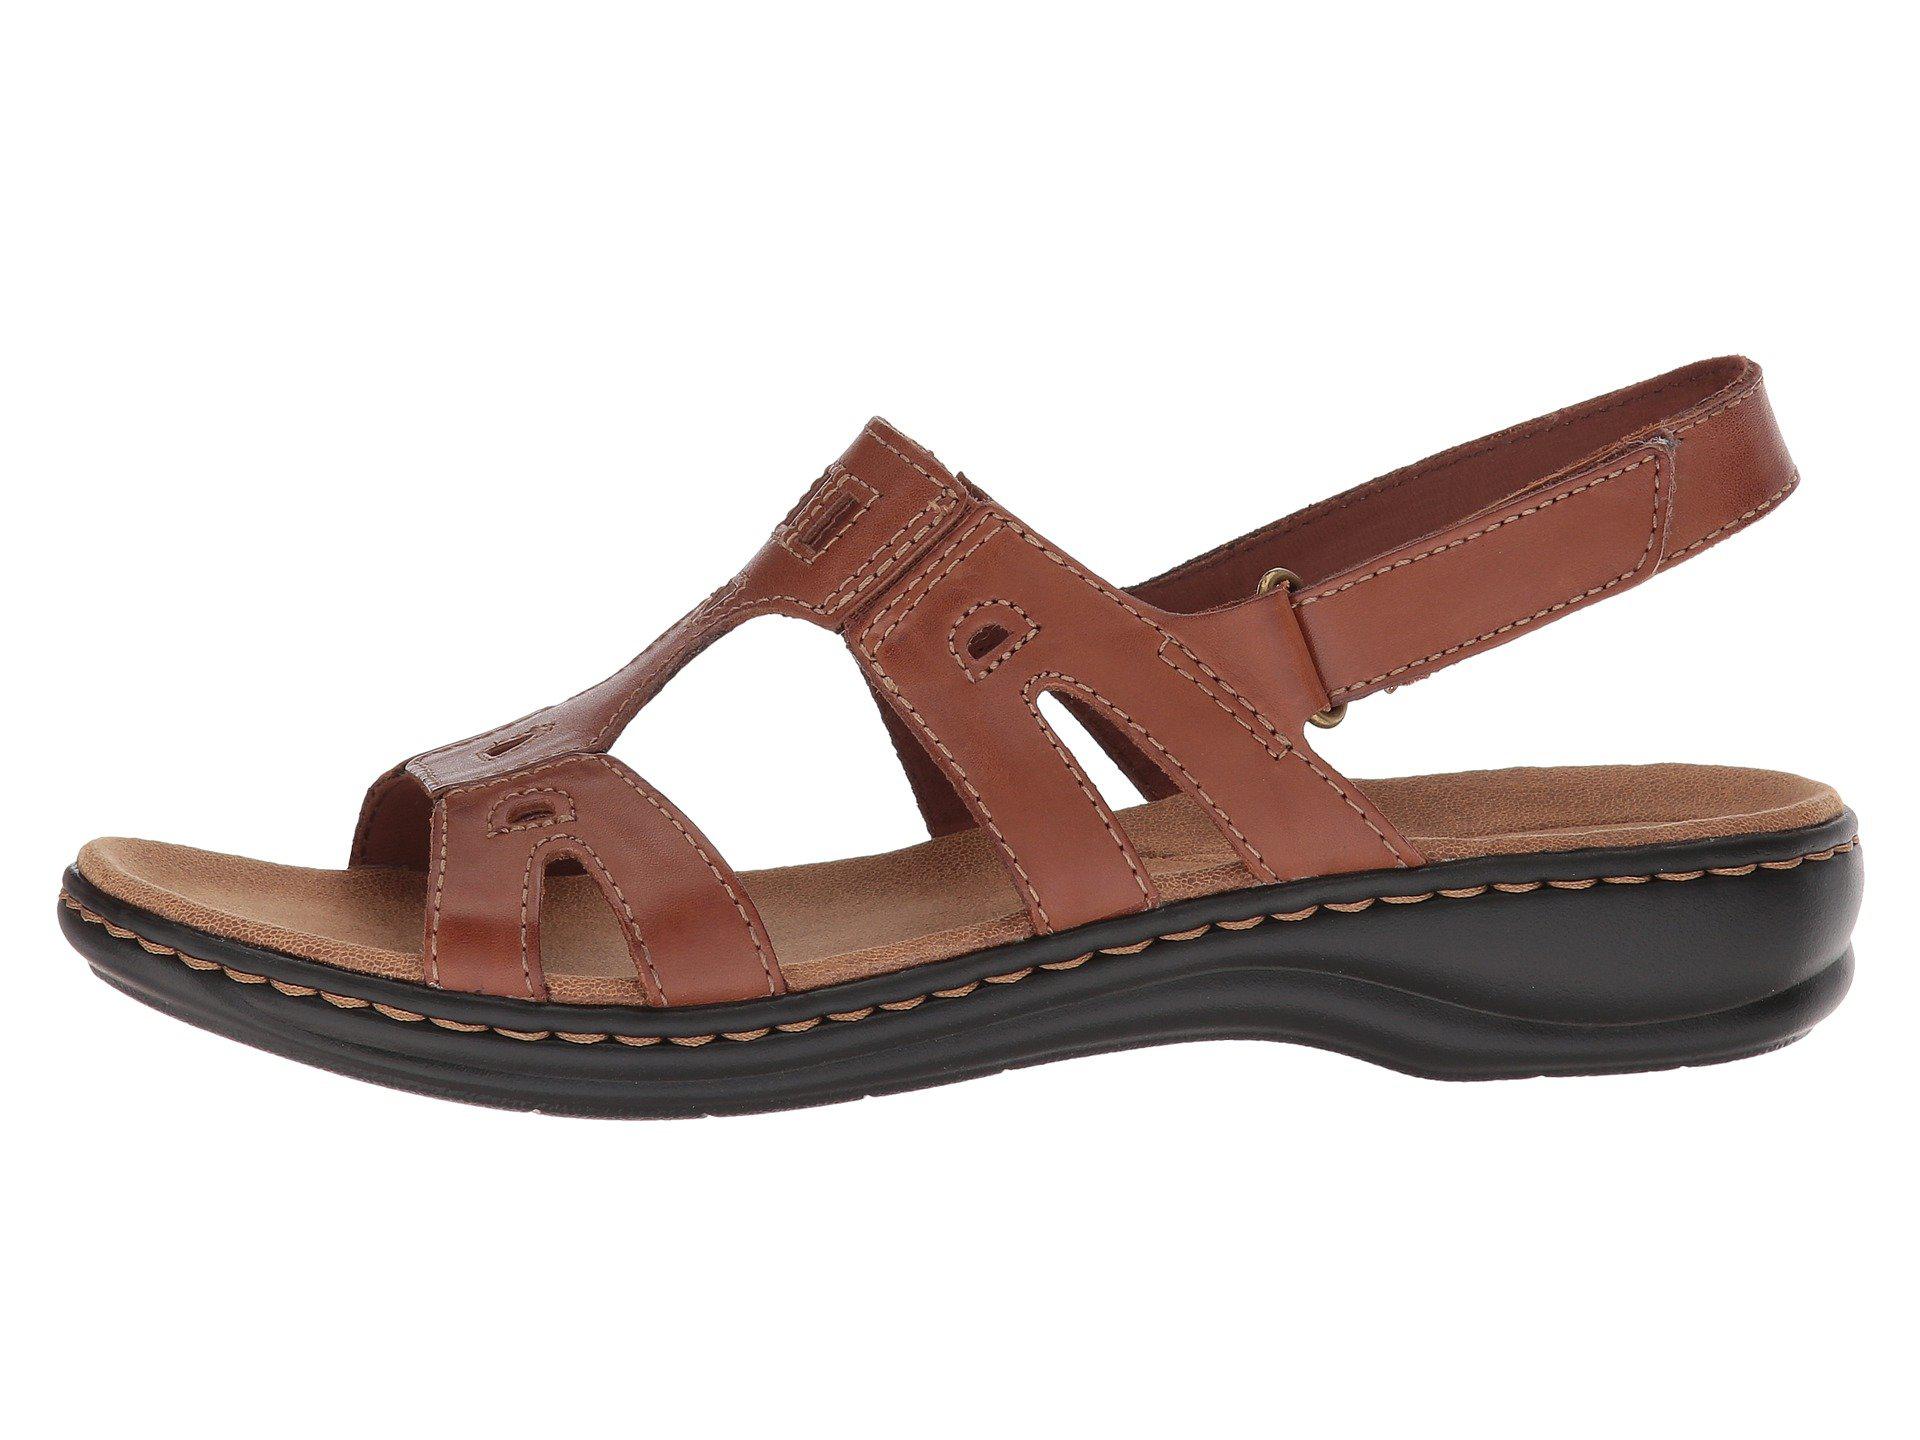 Clarks Leisa Annual (navy Leather) Women's Sandals in Dark Tan Leather ...